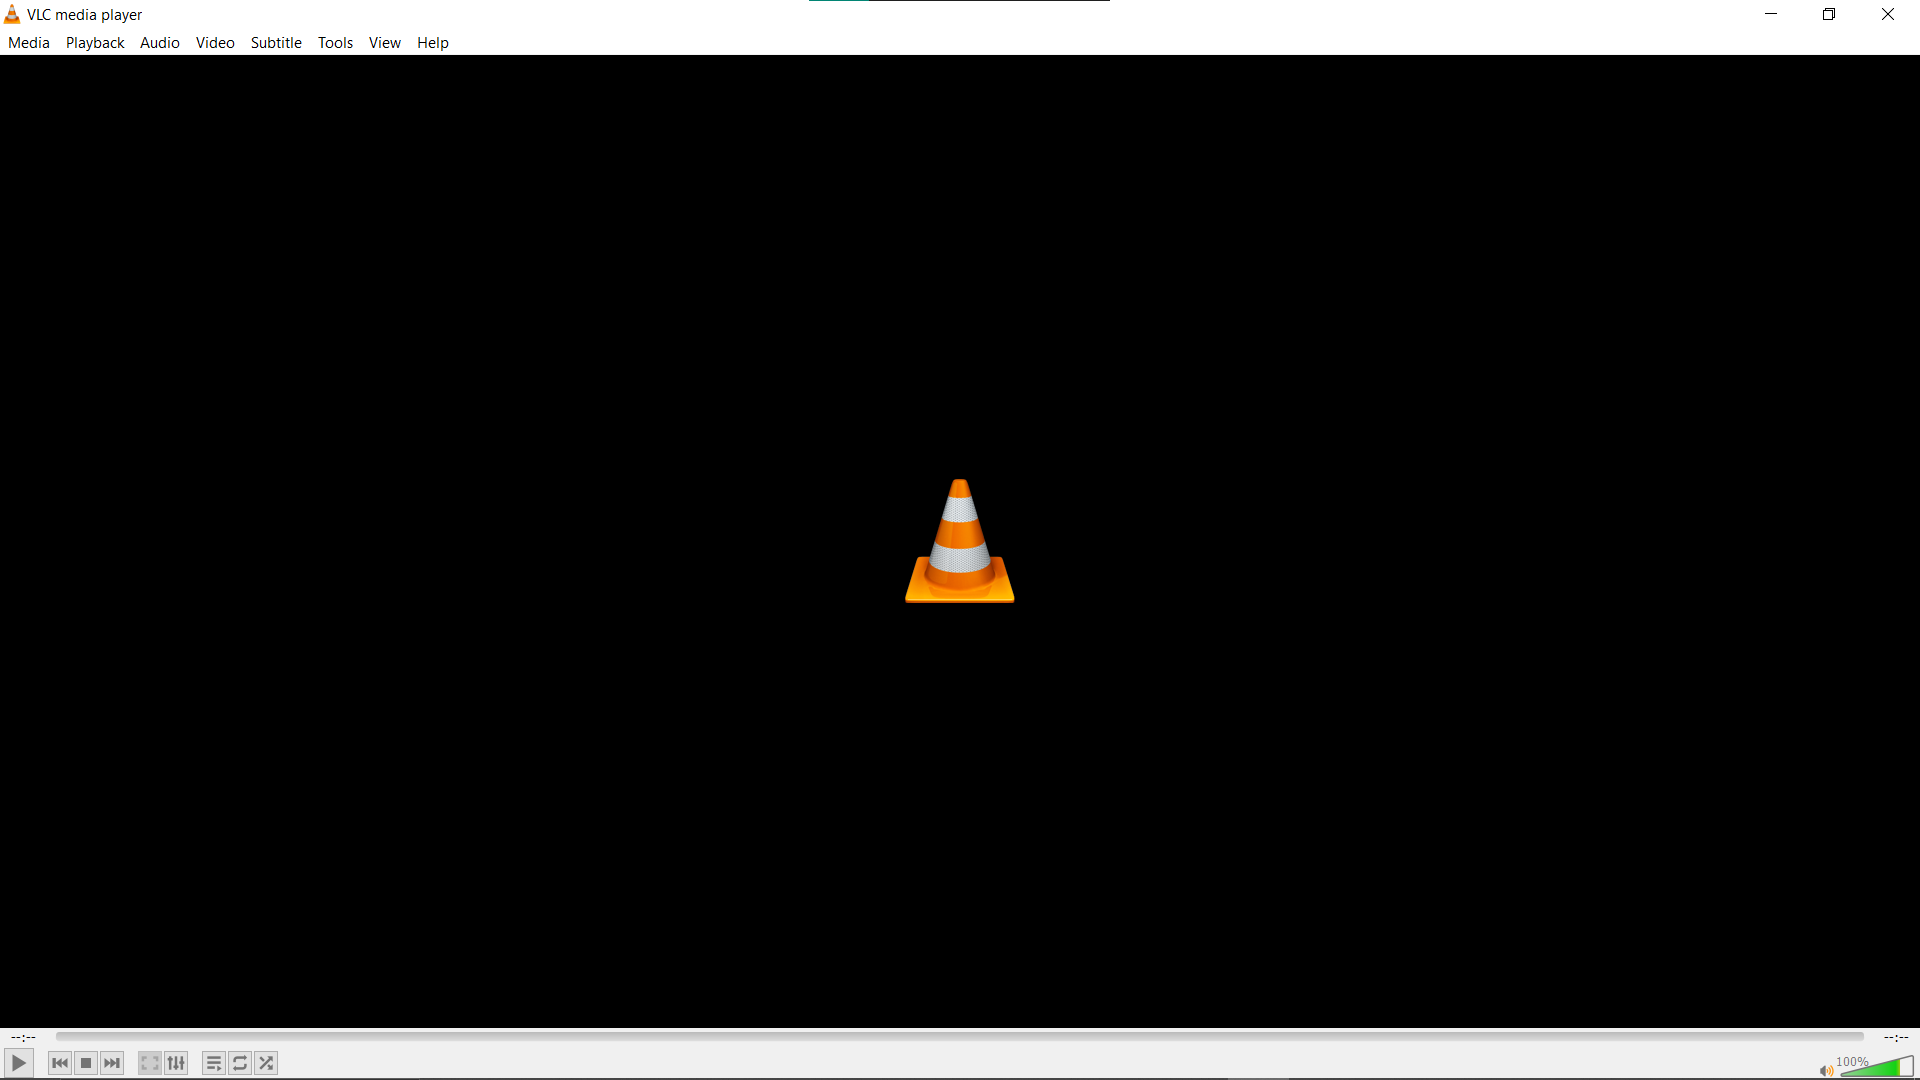 How To Reduce Video Quality Using VLC: Step 1